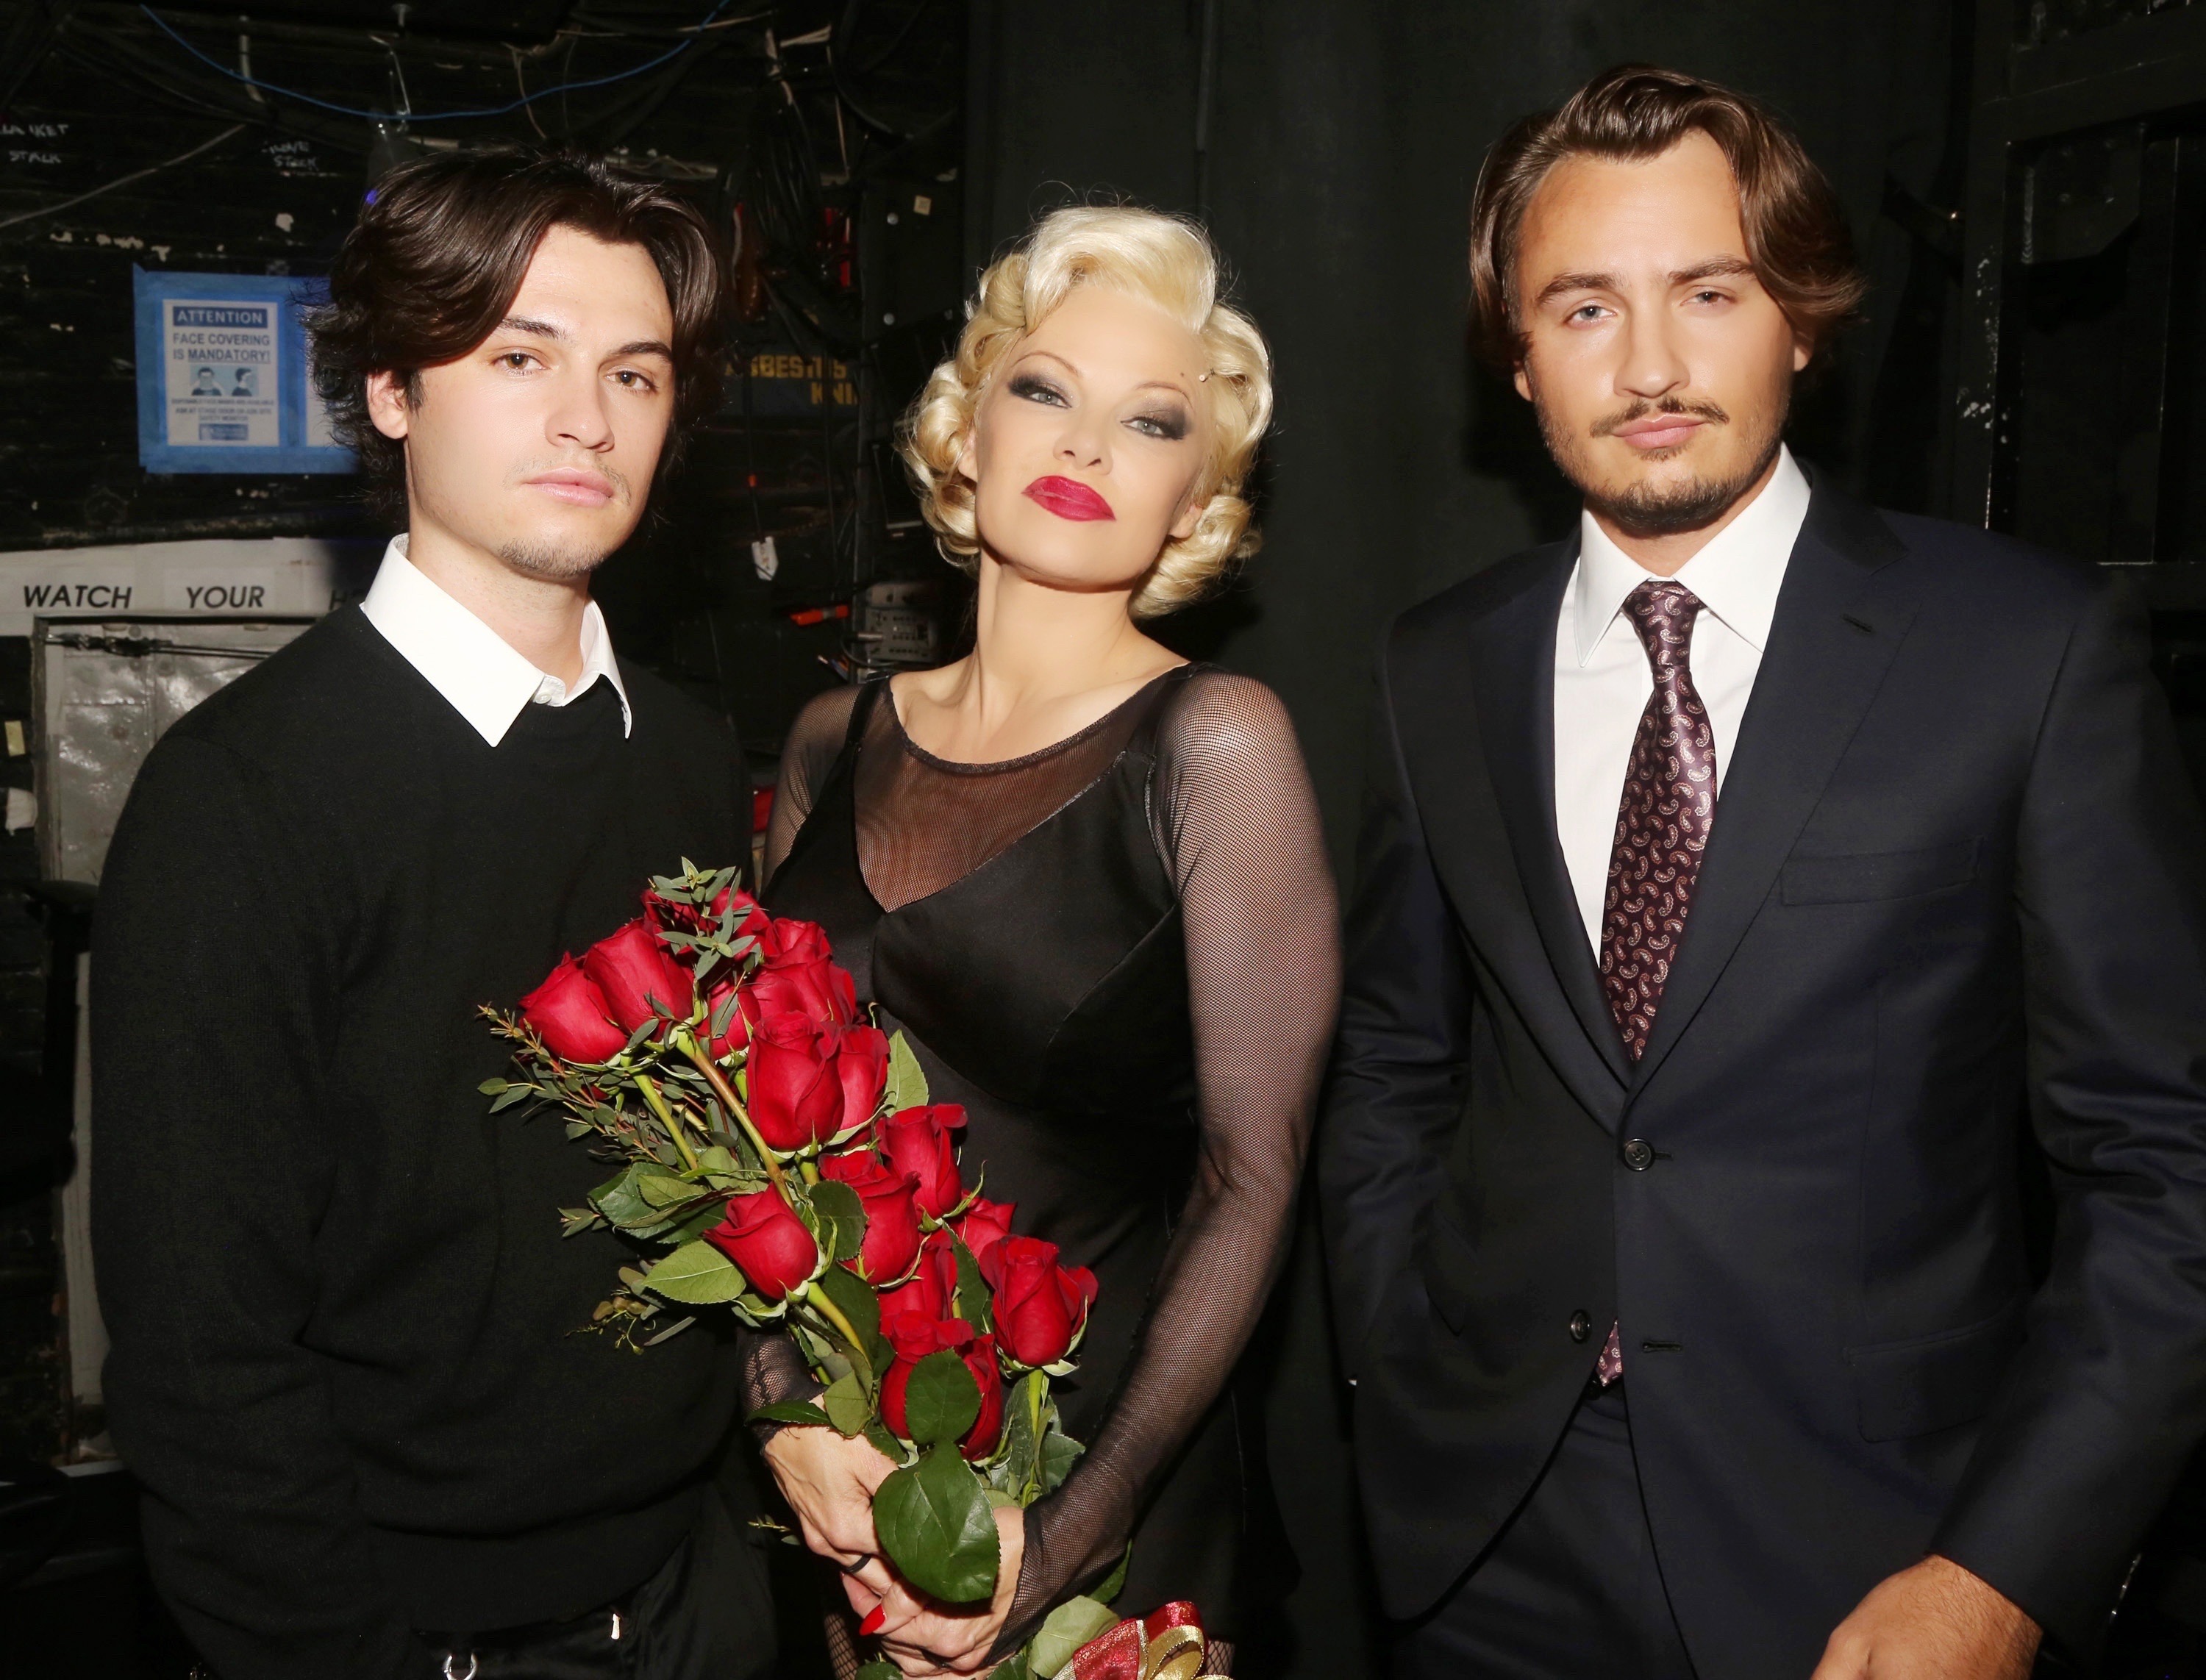 <p>Pamela Anderson was flanked by her sons -- Dylan Jagger Lee (who was born in 1997) on the left and Brandon Thomas Lee (who was born in 1996) on the right -- after making her Broadway debut playing Roxie Hart in "Chicago" on April 12, 2022. Like dad Tommy Lee, Dylan is a musician, though he favors more electronic sounds. His previous bands include Motel 7 and Midnight Kids. Big brother Brandon has been a reality TV star -- he appeared on "The Hills: New Beginnings" -- and in 2021 launched a capsule collection for the <span>Swingers Club fashion brand. </span></p>